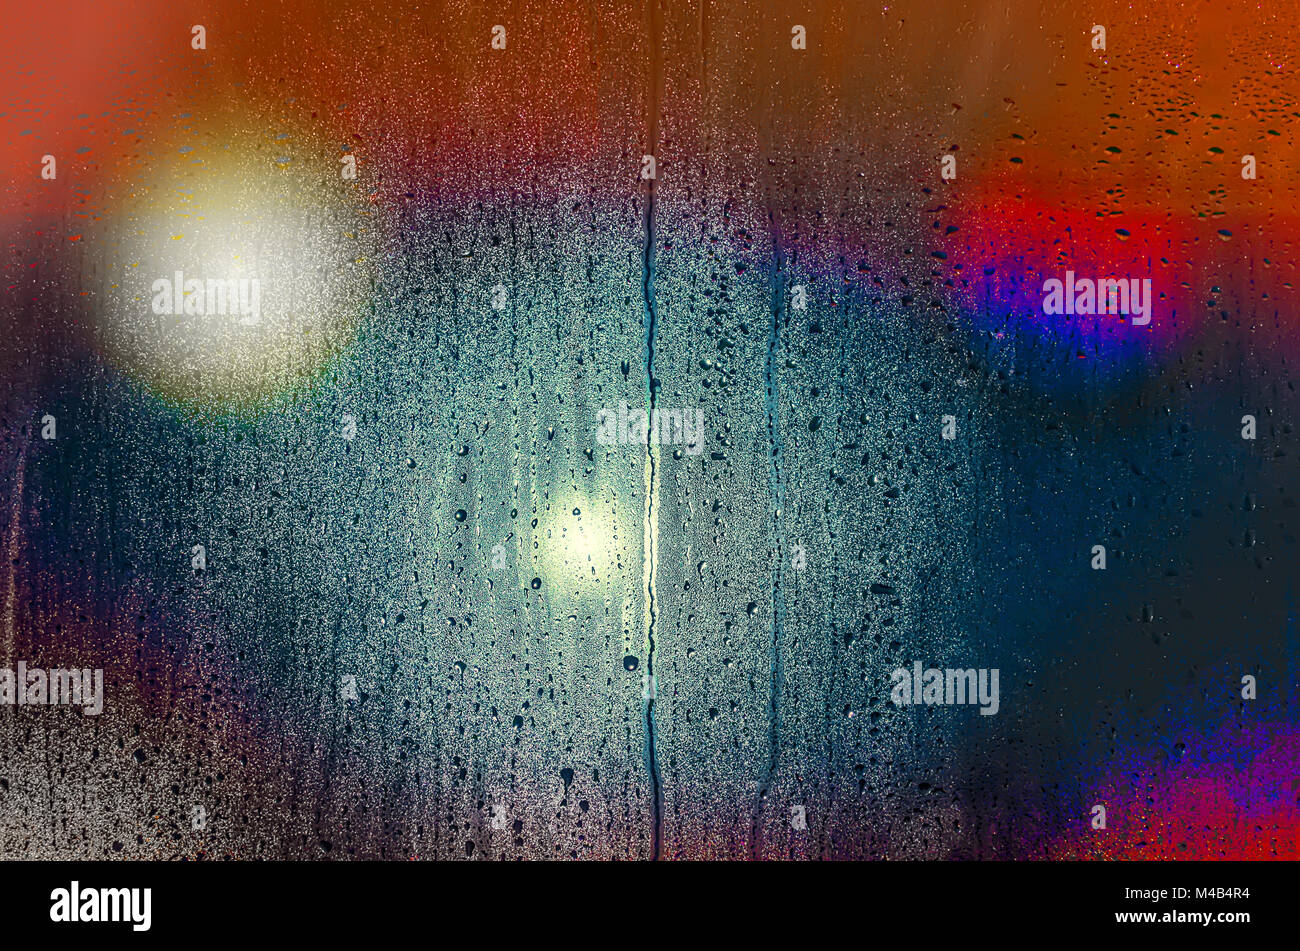 Drops and water spots on the glass on a rainy evening, multicolored spots and lights shining Stock Photo